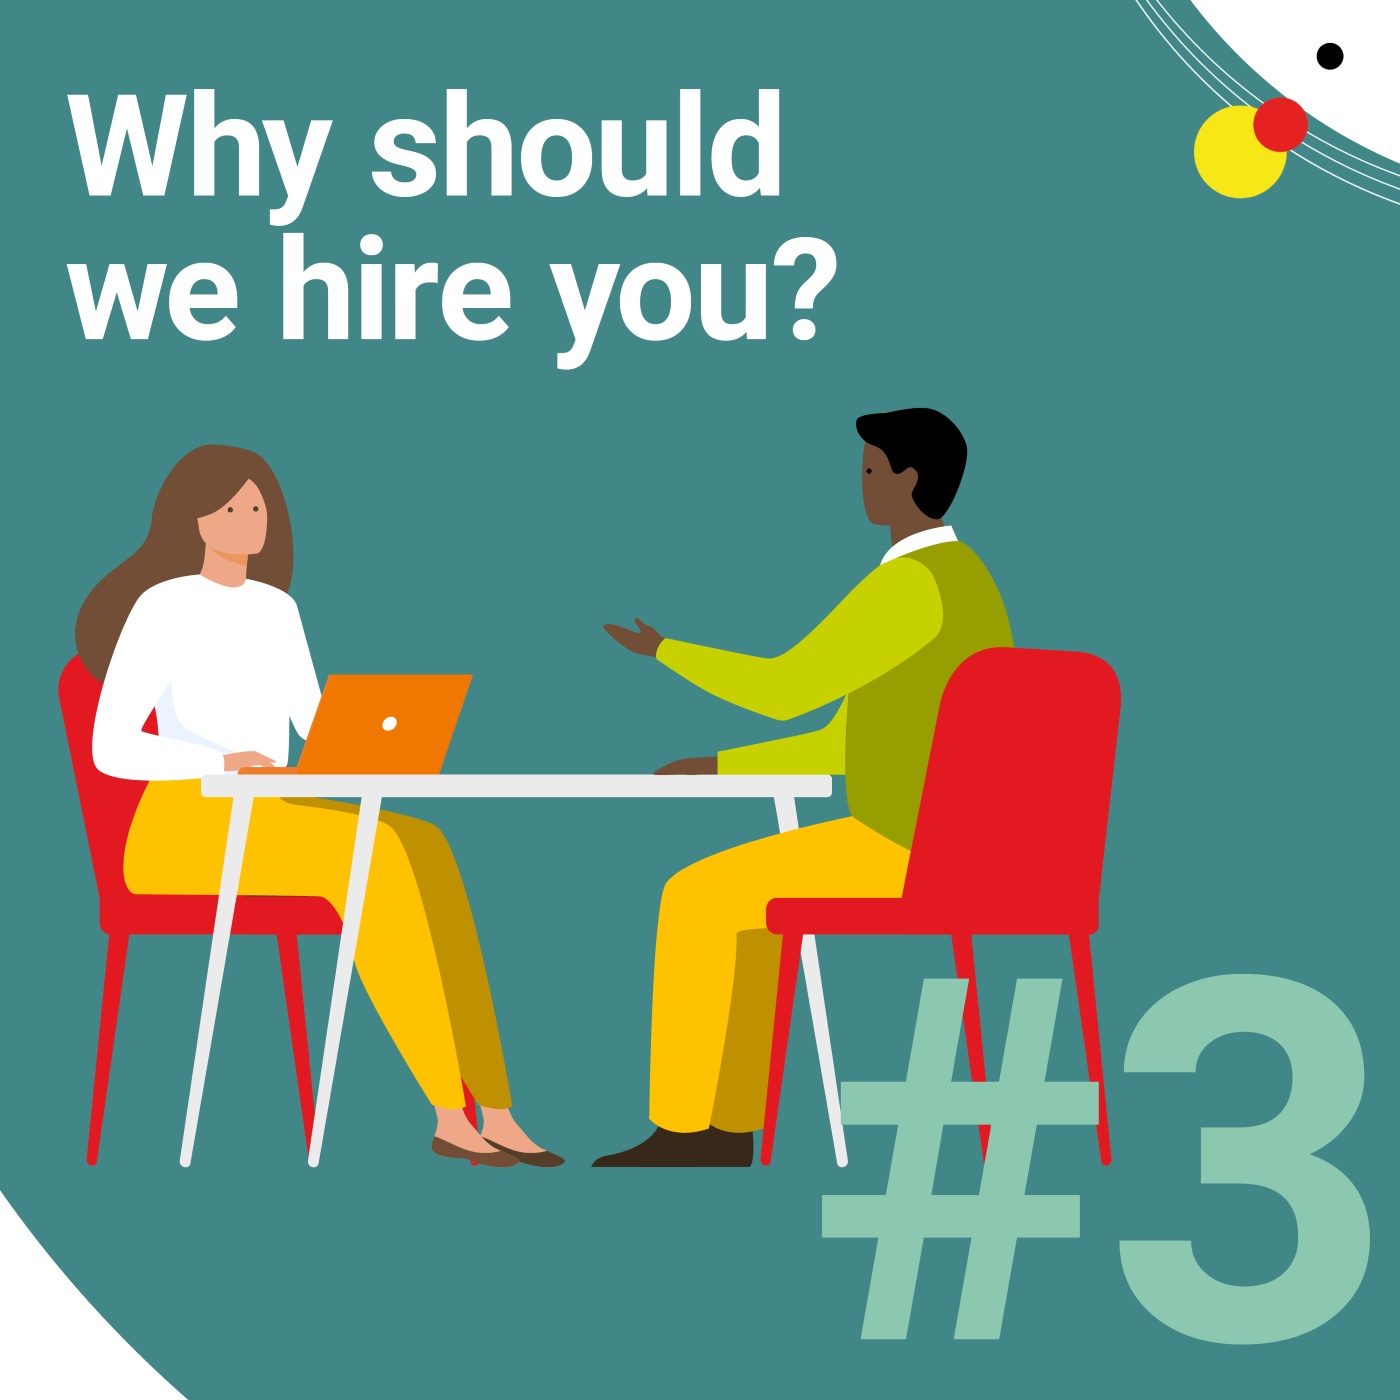 #3 Why should we hire you? - From your application to your first day at work in Germany